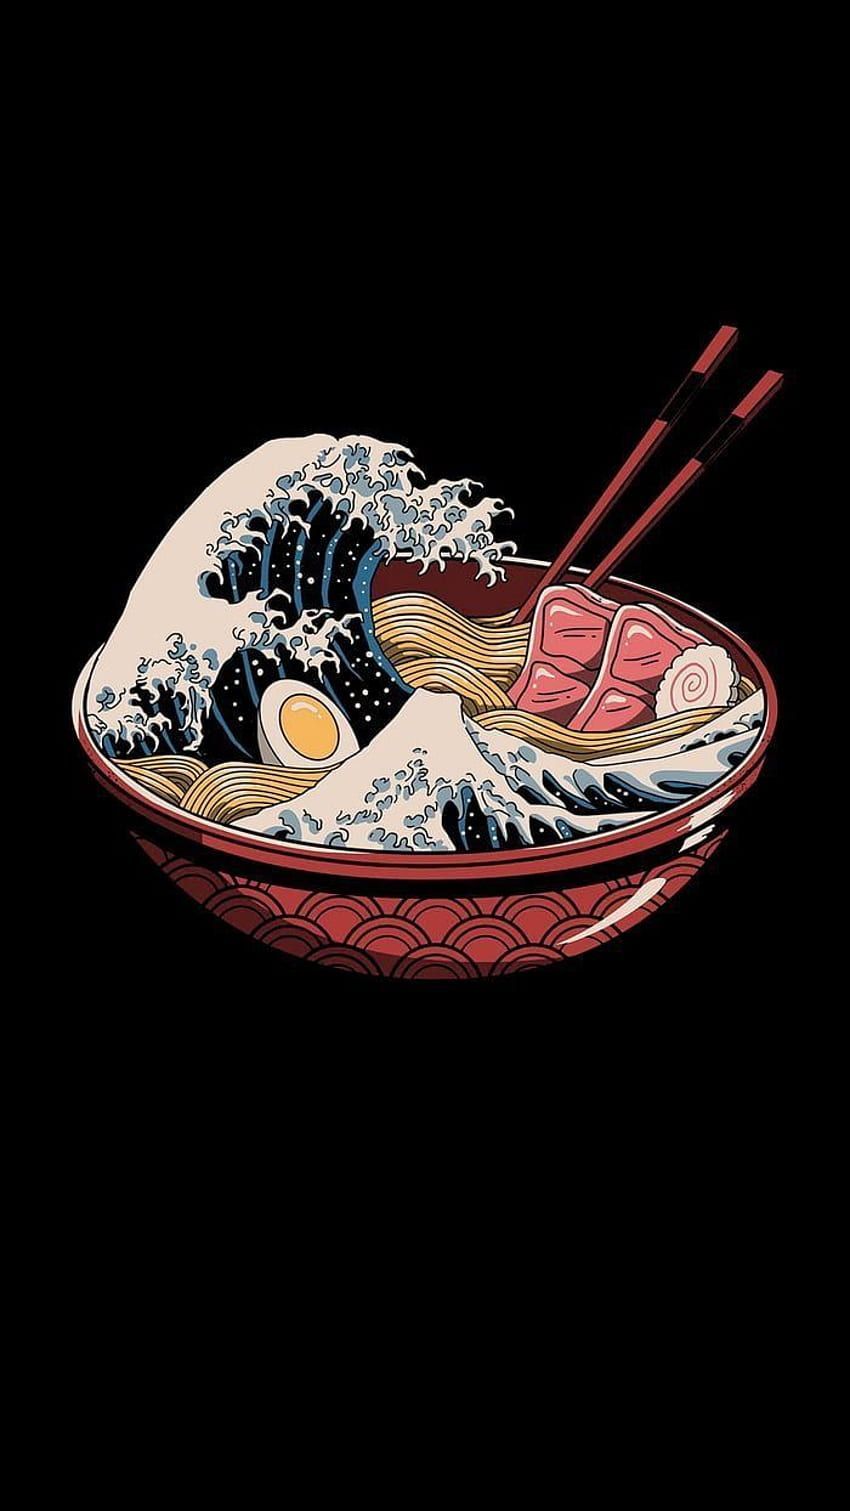 The great wave off kanagawa by person - Modern, food, ramen, The Great Wave off Kanagawa